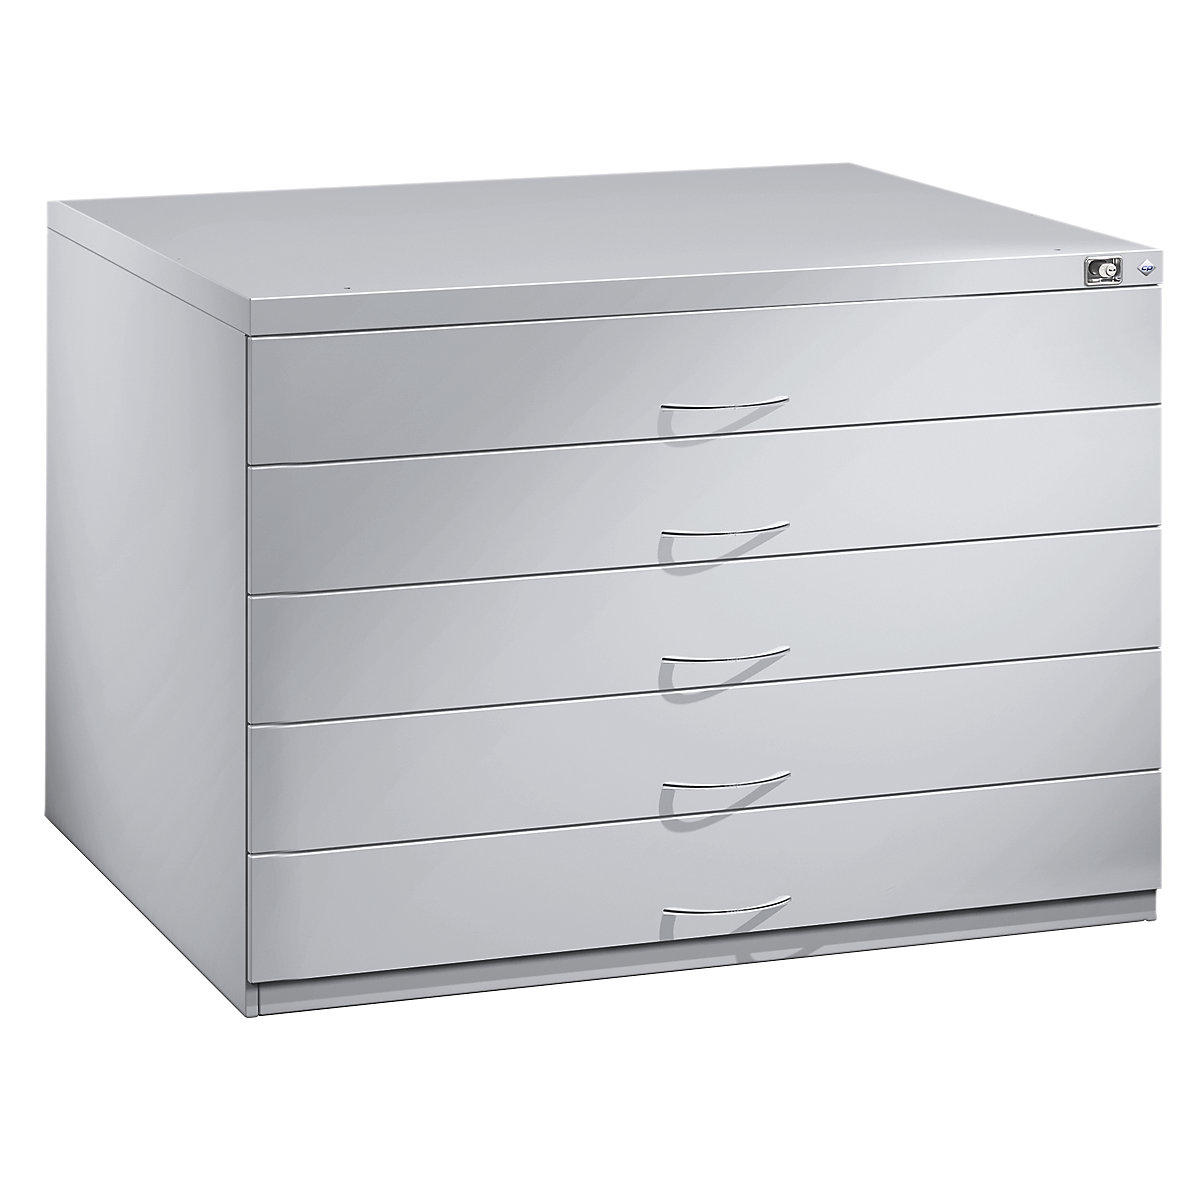 Drawing cabinet – C+P, A1, 5 drawers, height 760 mm, light grey-17